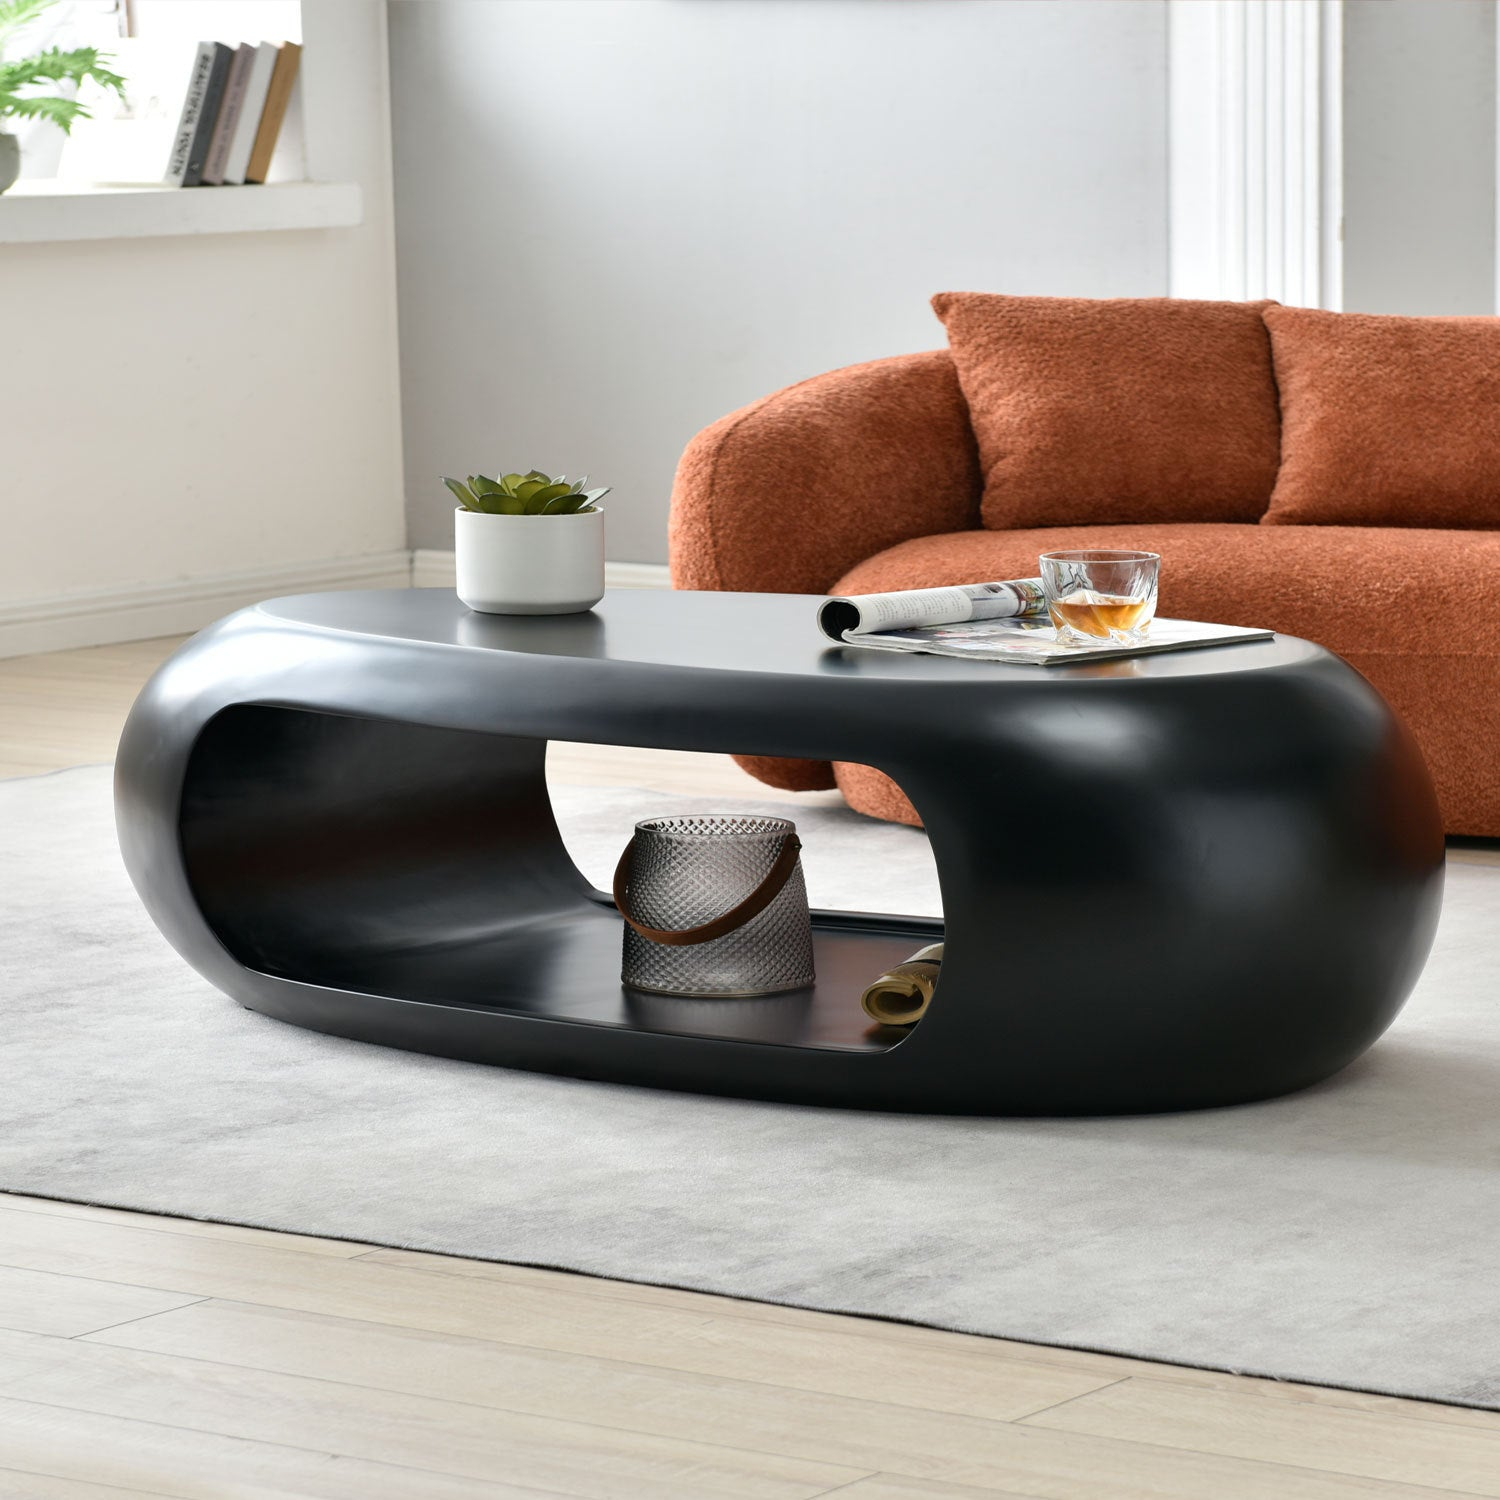 53.93'' Modern Oval Coffee Table, Sturdy Fiberglass Center Cocktail Table Tea Table for Living Room, BLACK, No Need Assembly, Goodies N Stuff